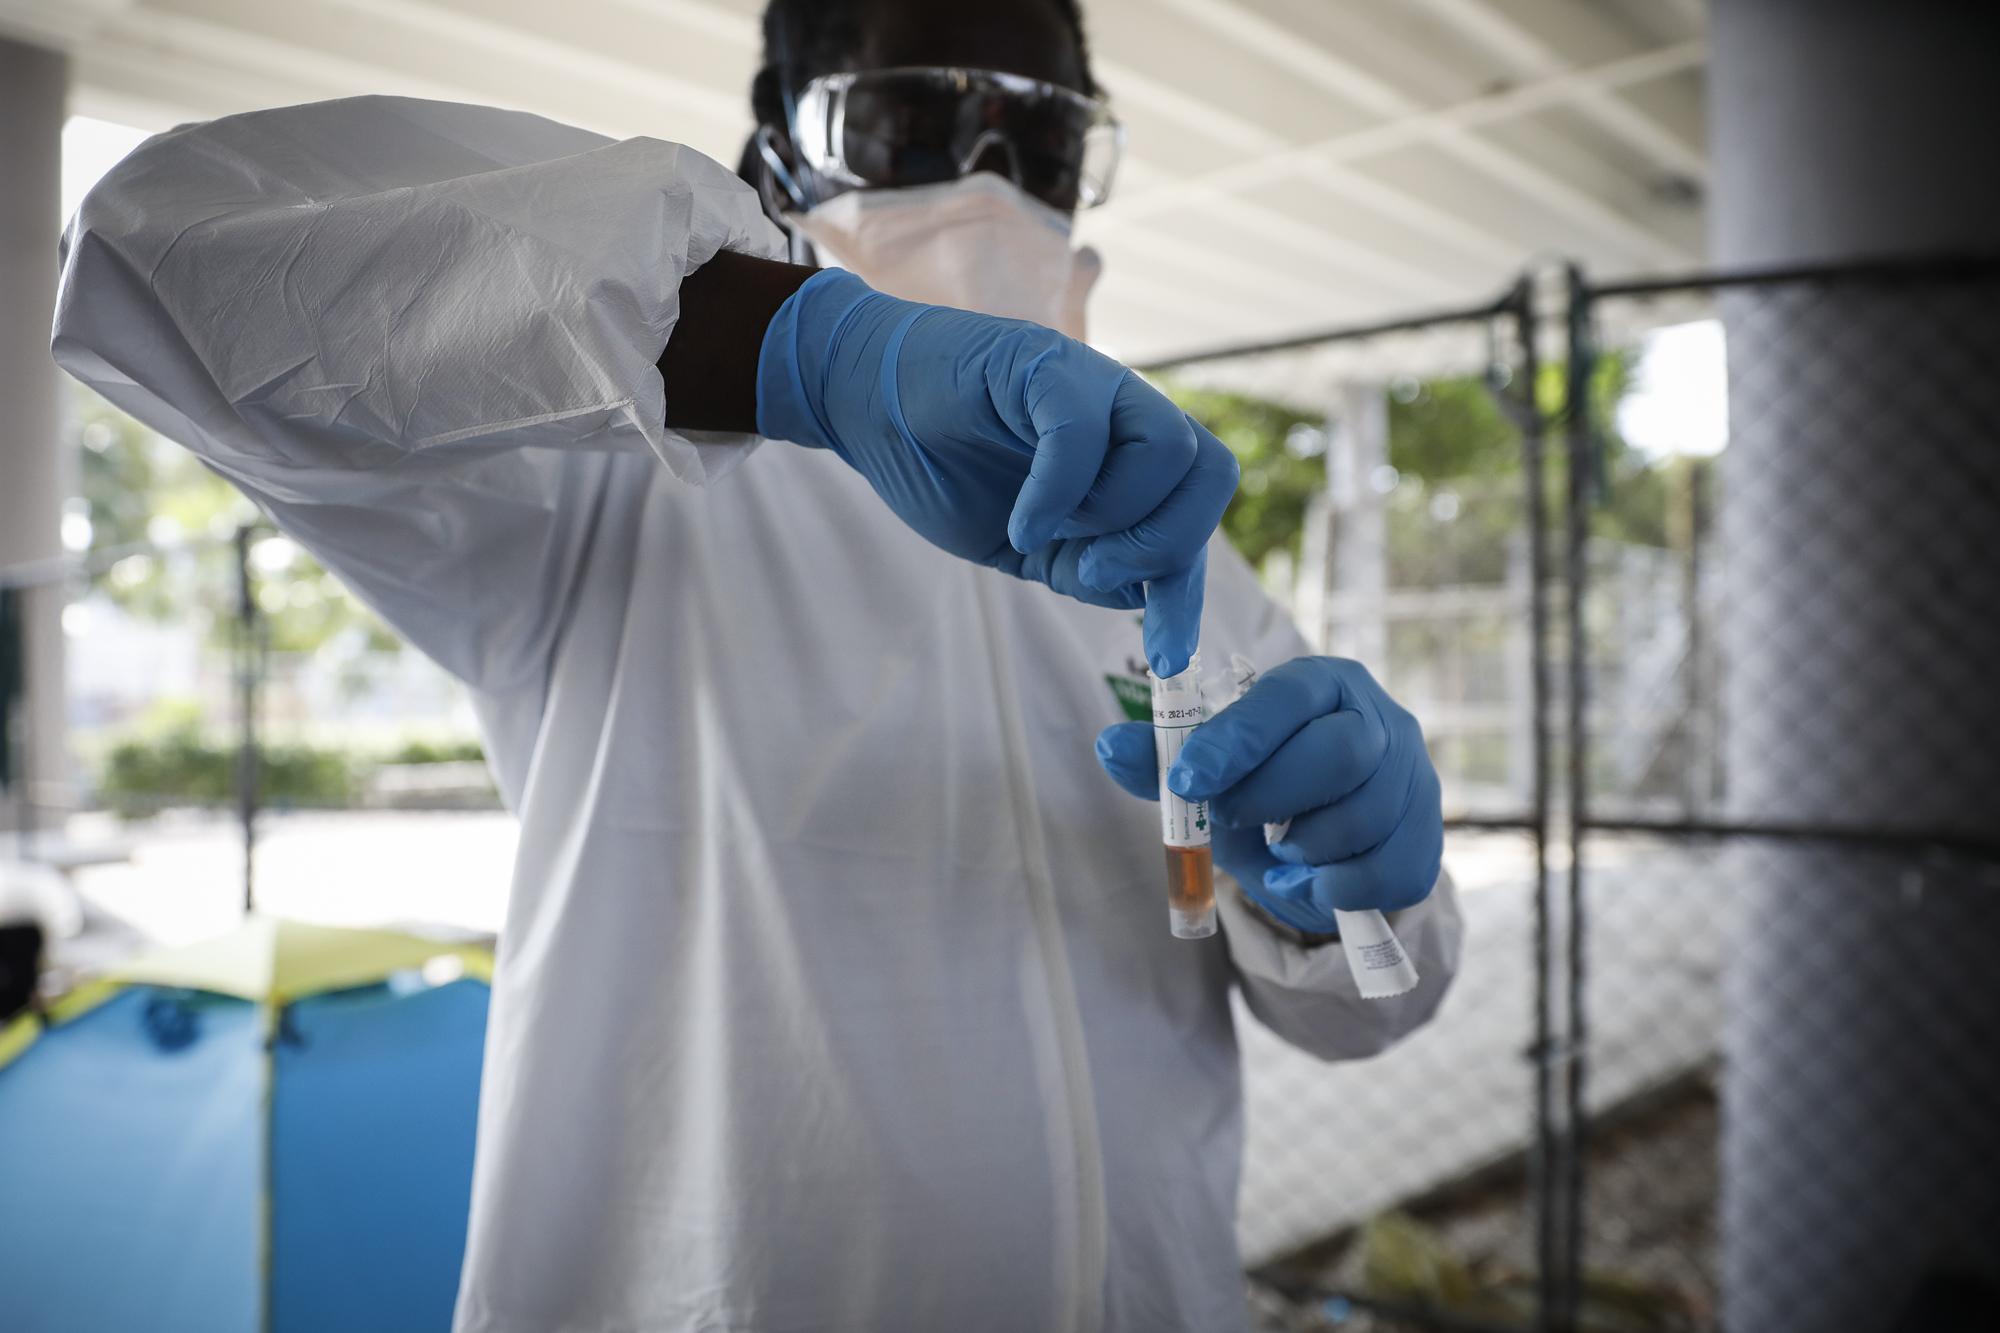 A worker holds a sample collected from a homeless man during a Miami-Dade County testing operation for the coronavirus disease (COVID-19), in downtown Miami, Florida, U.S., April 16, 2020. REUTERS/Marco Bello